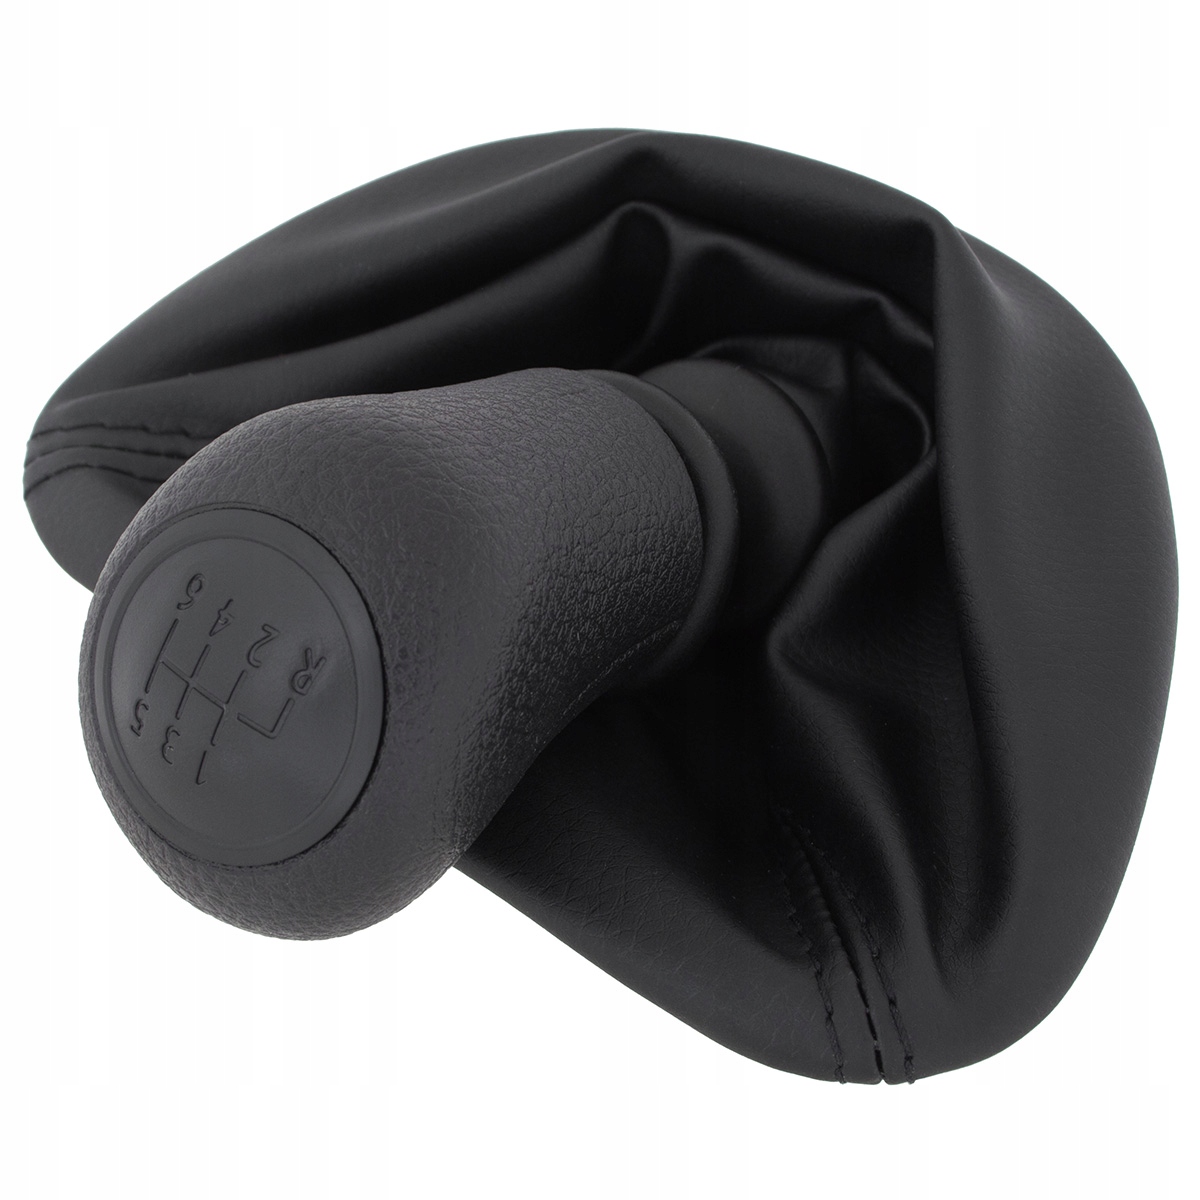 Knob gear change cover . mercedes vito w639 - Easy Online Shopping ❱ XDALYS